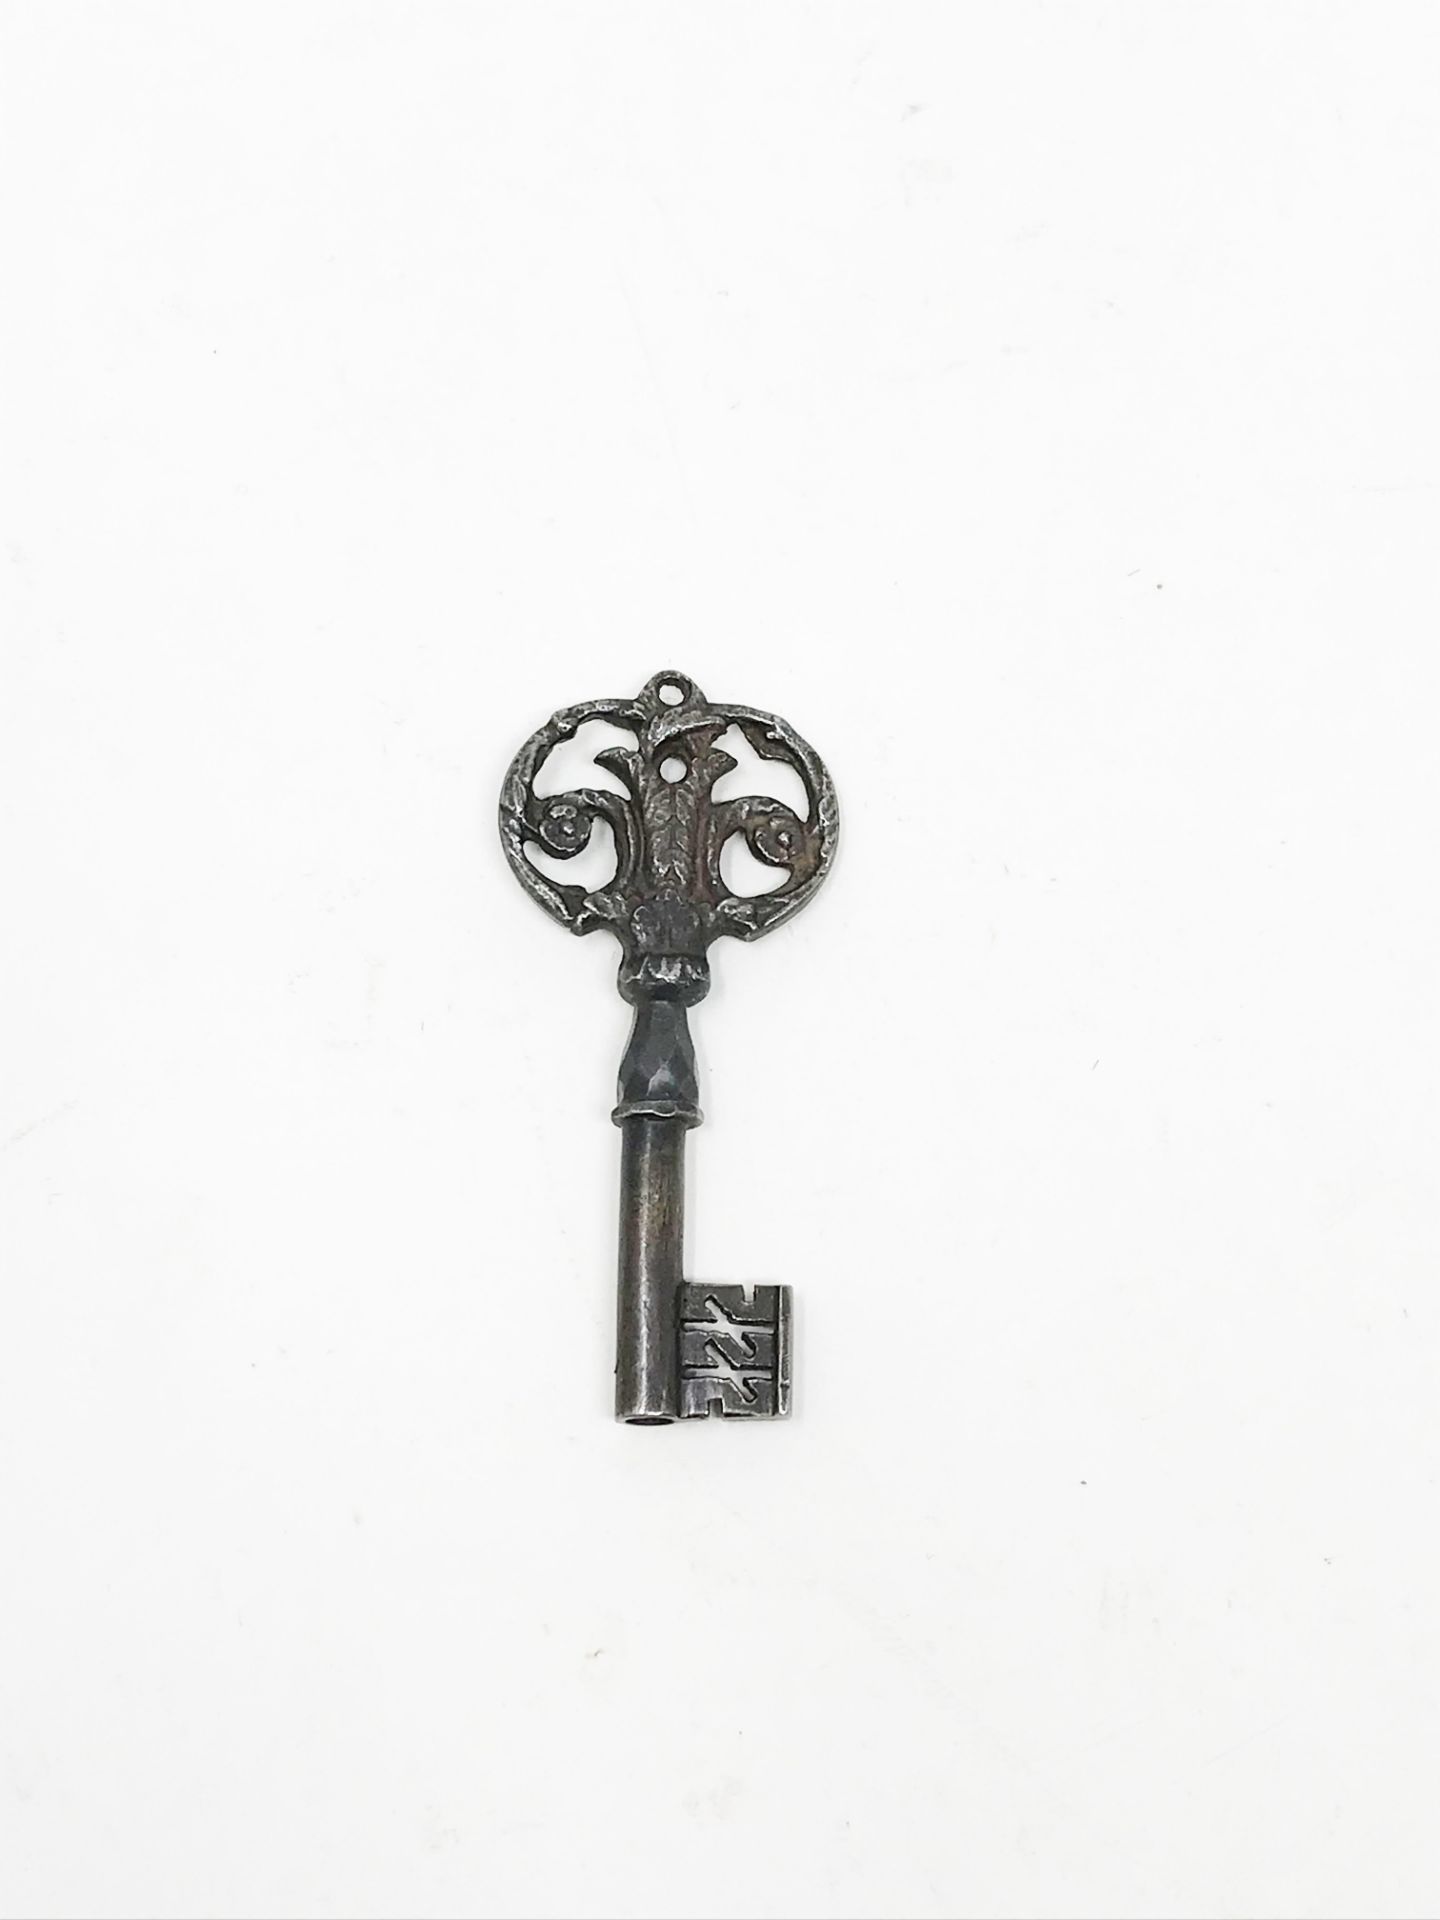 German key5,86 cmPart of the chapter "From beyond the Rhine".